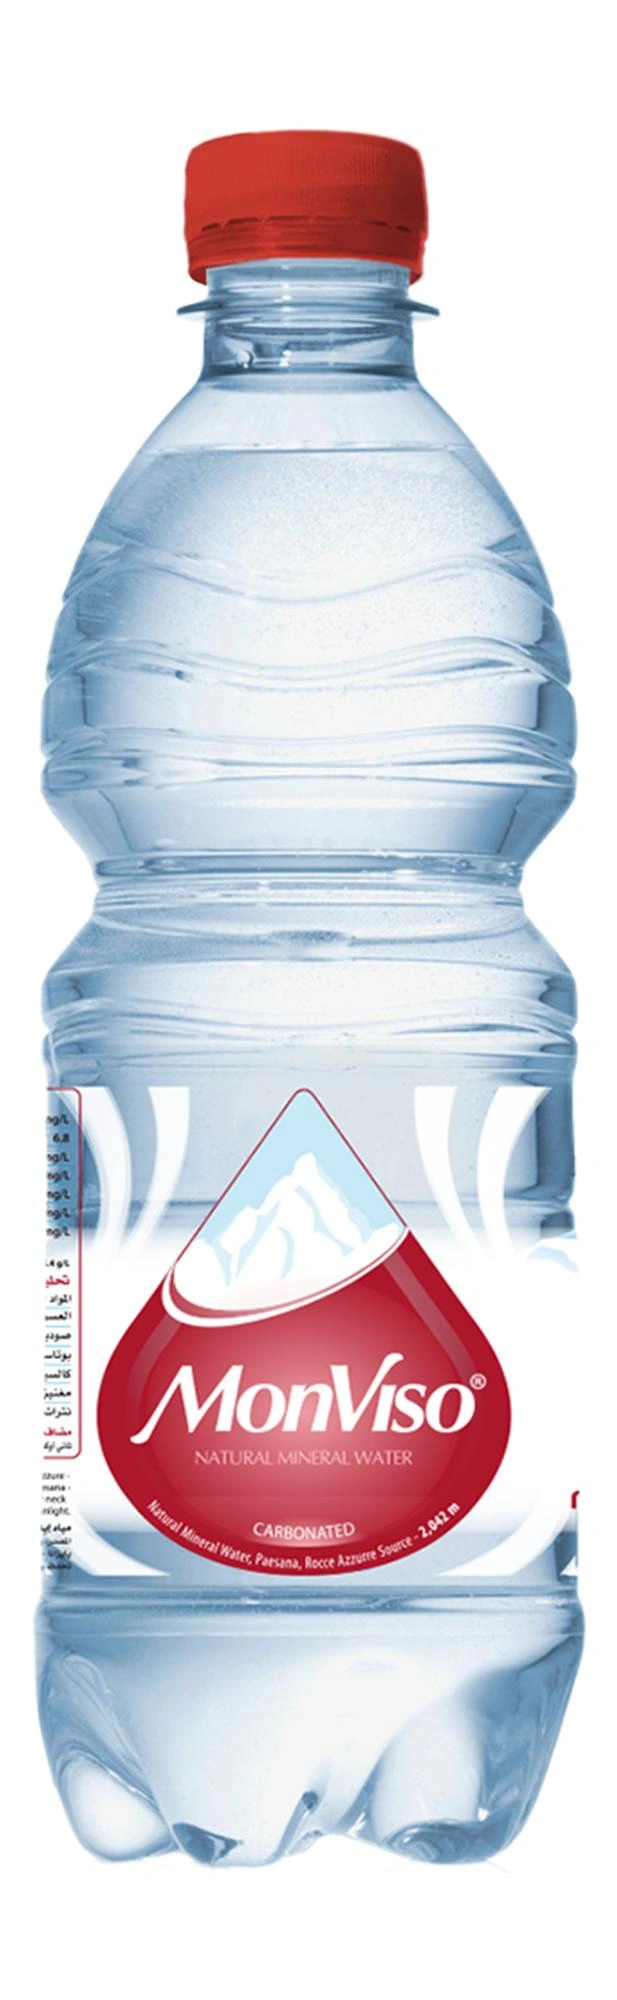 Monviso Natural Mineral Sparkling Water 500 ml